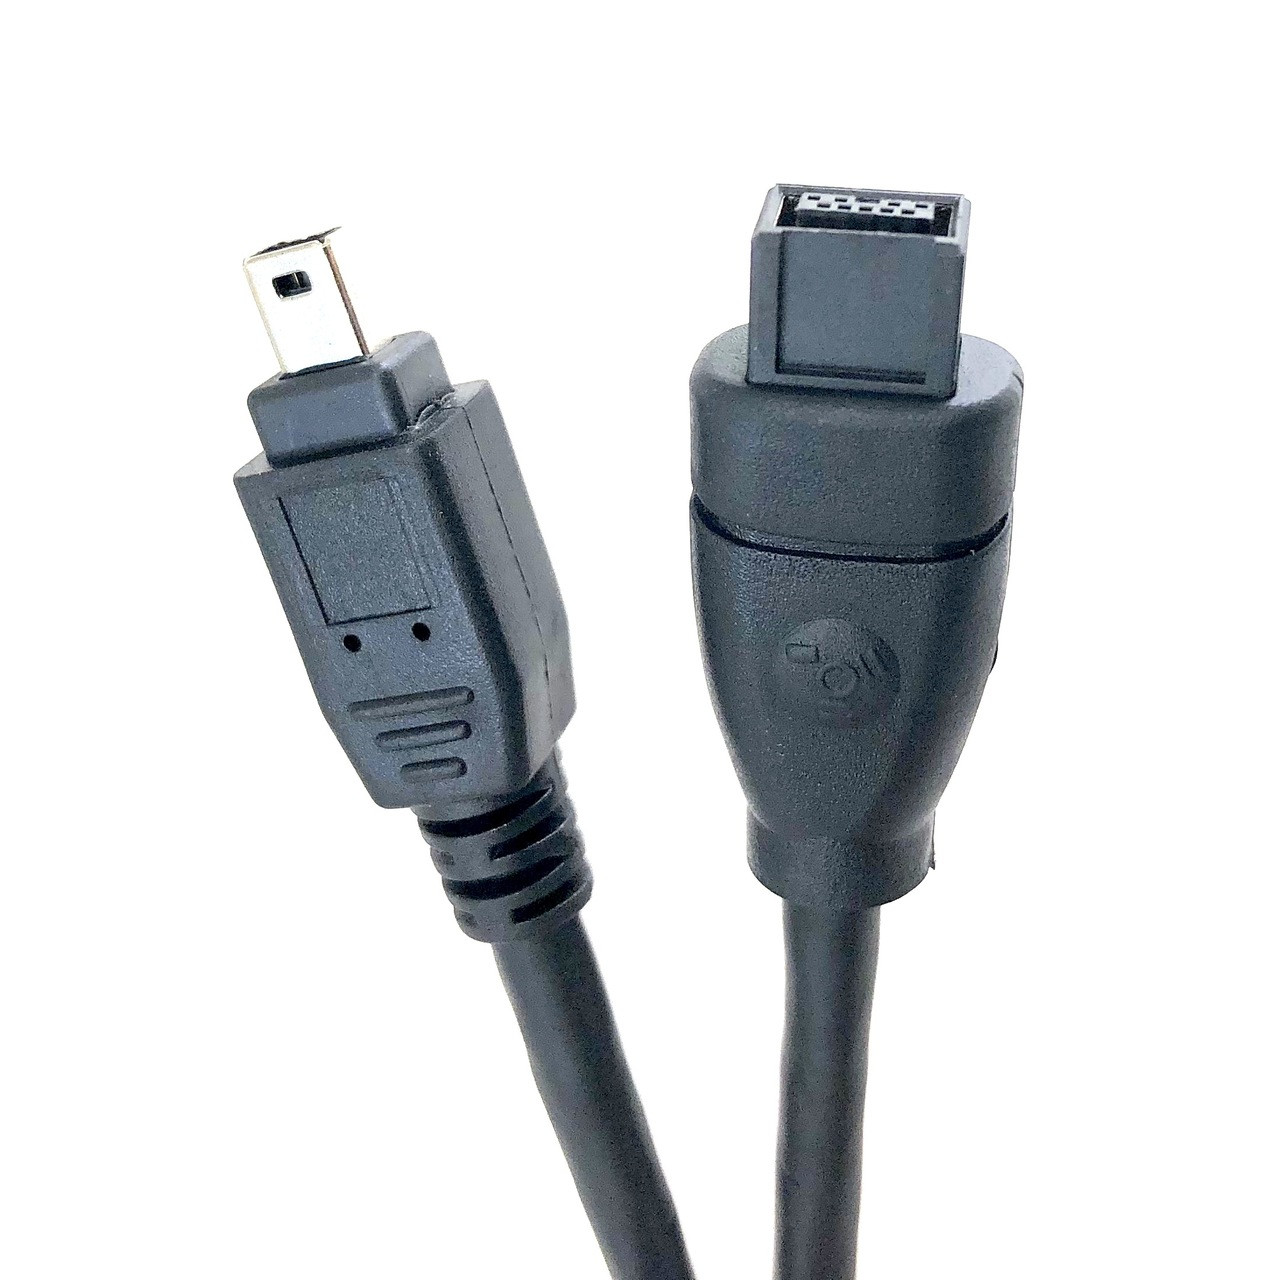 FireWire (IEEE 1394B) 9-Pin to 4-Pin Cable